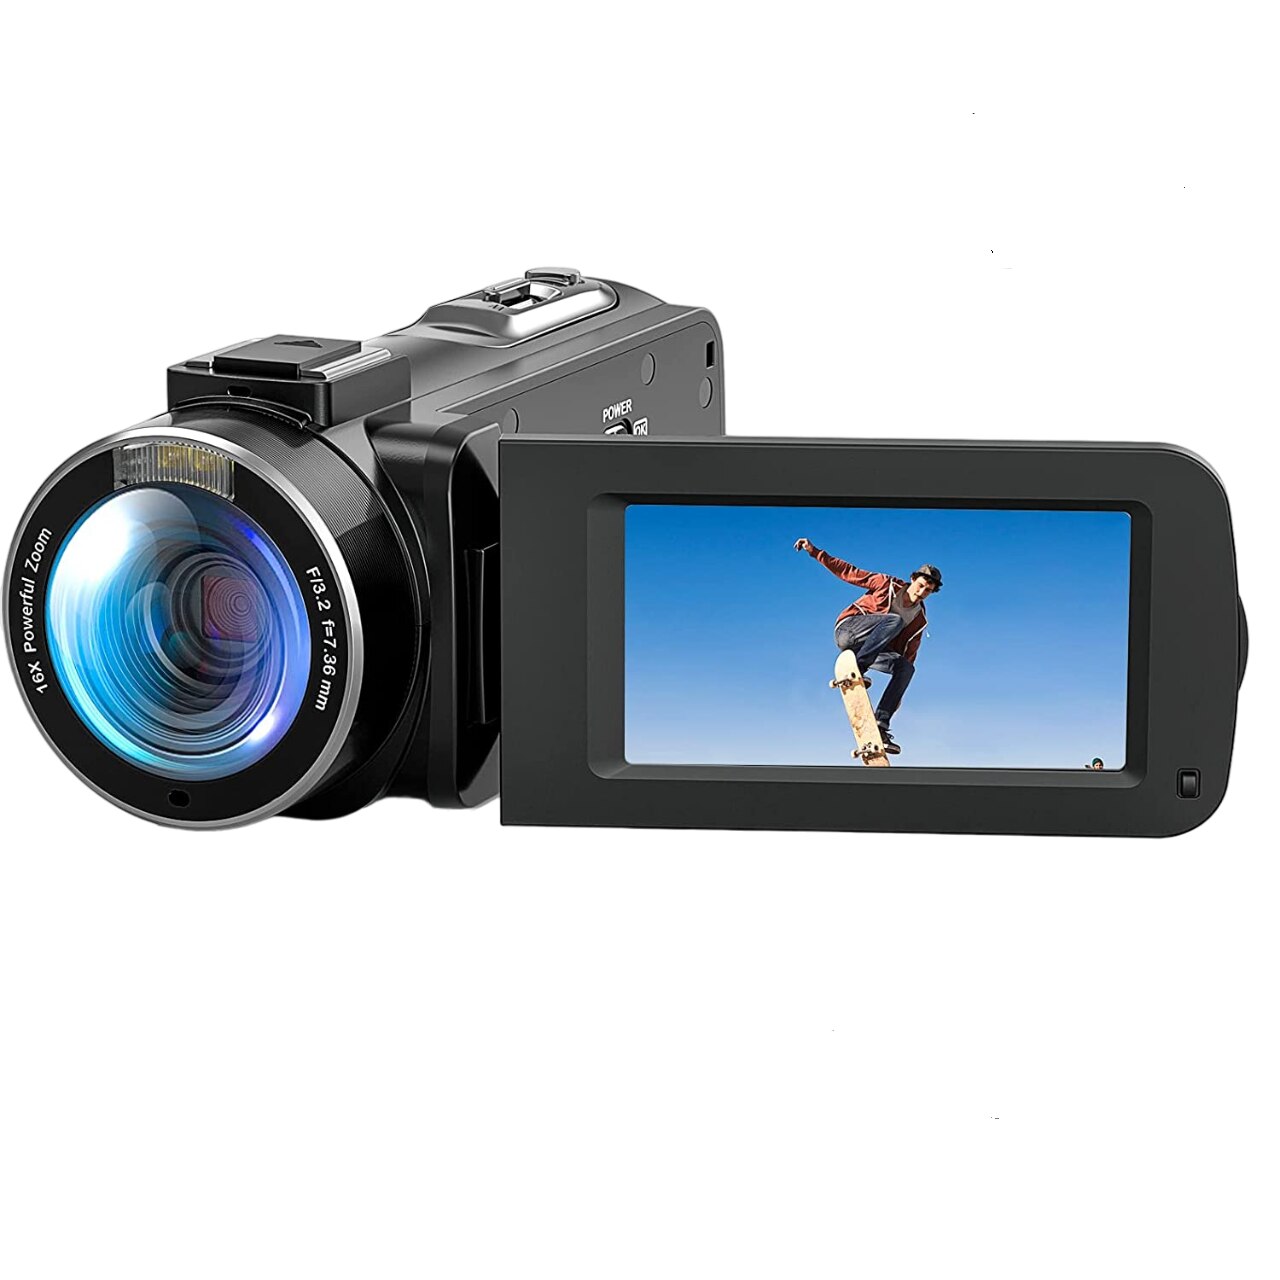  WZX Video Camera Camcorder, Full HD 30FPS 36MP 16X Digital Zoom  Digital Camera,IR Night Vision Vlogging Camera,  Camera with  External Microphone, Lens Hood, Stabilizer, Remote Control : Electrónica